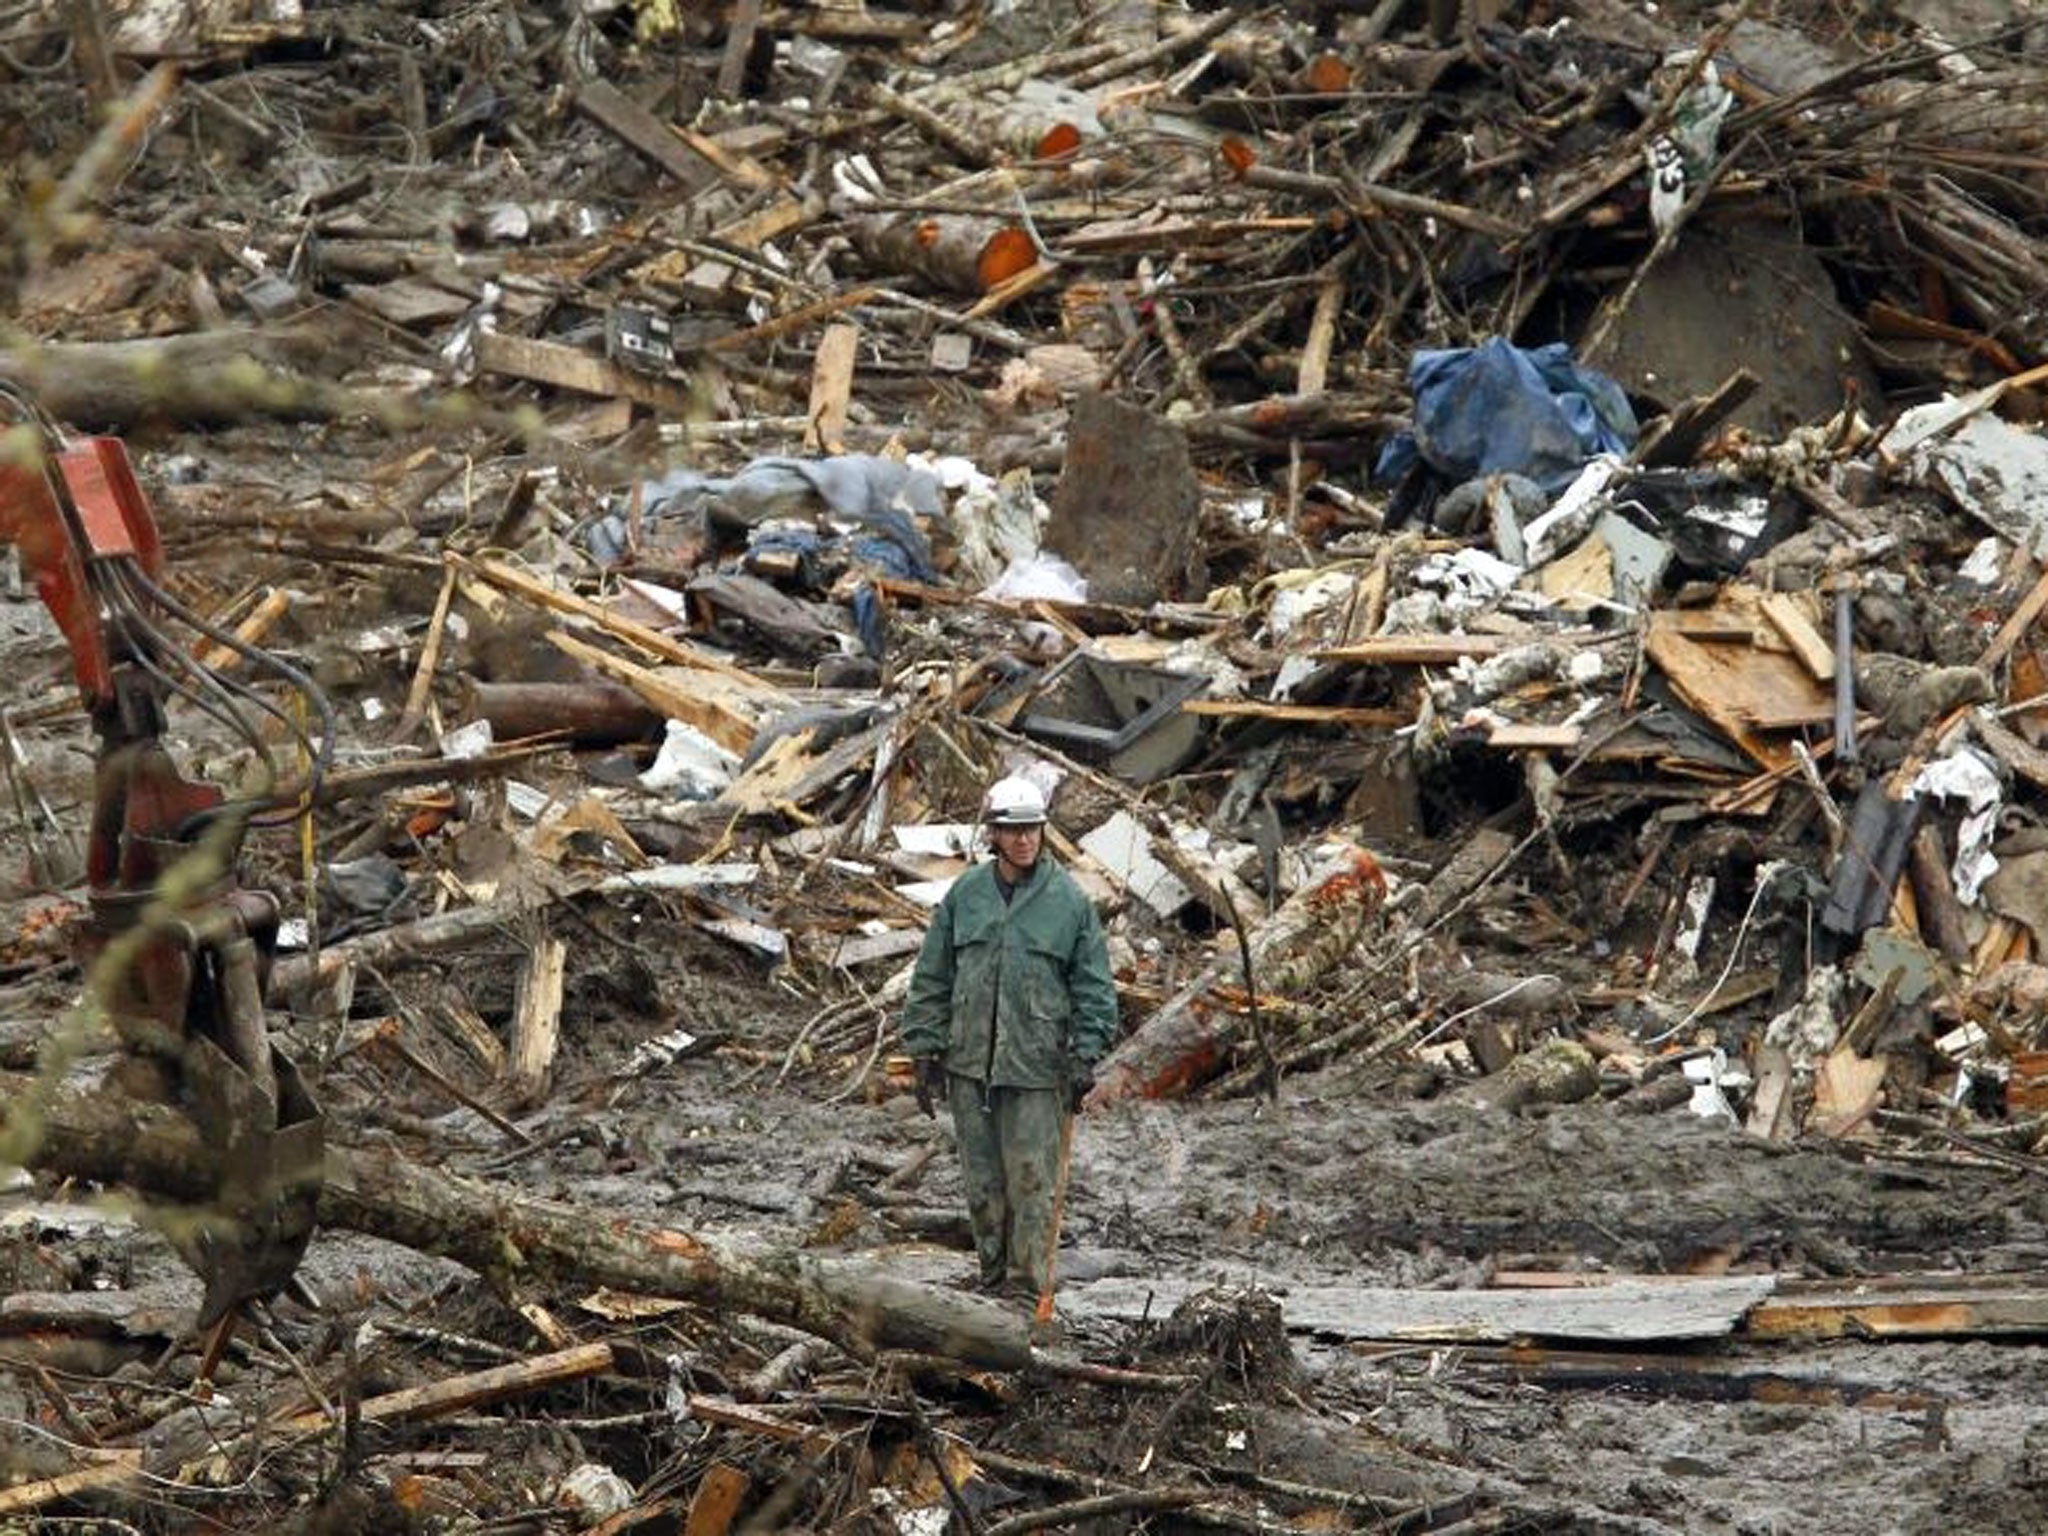 A rescue worker looks over the debris pile from the mudslide in Oso, Washington March 27, 2014.